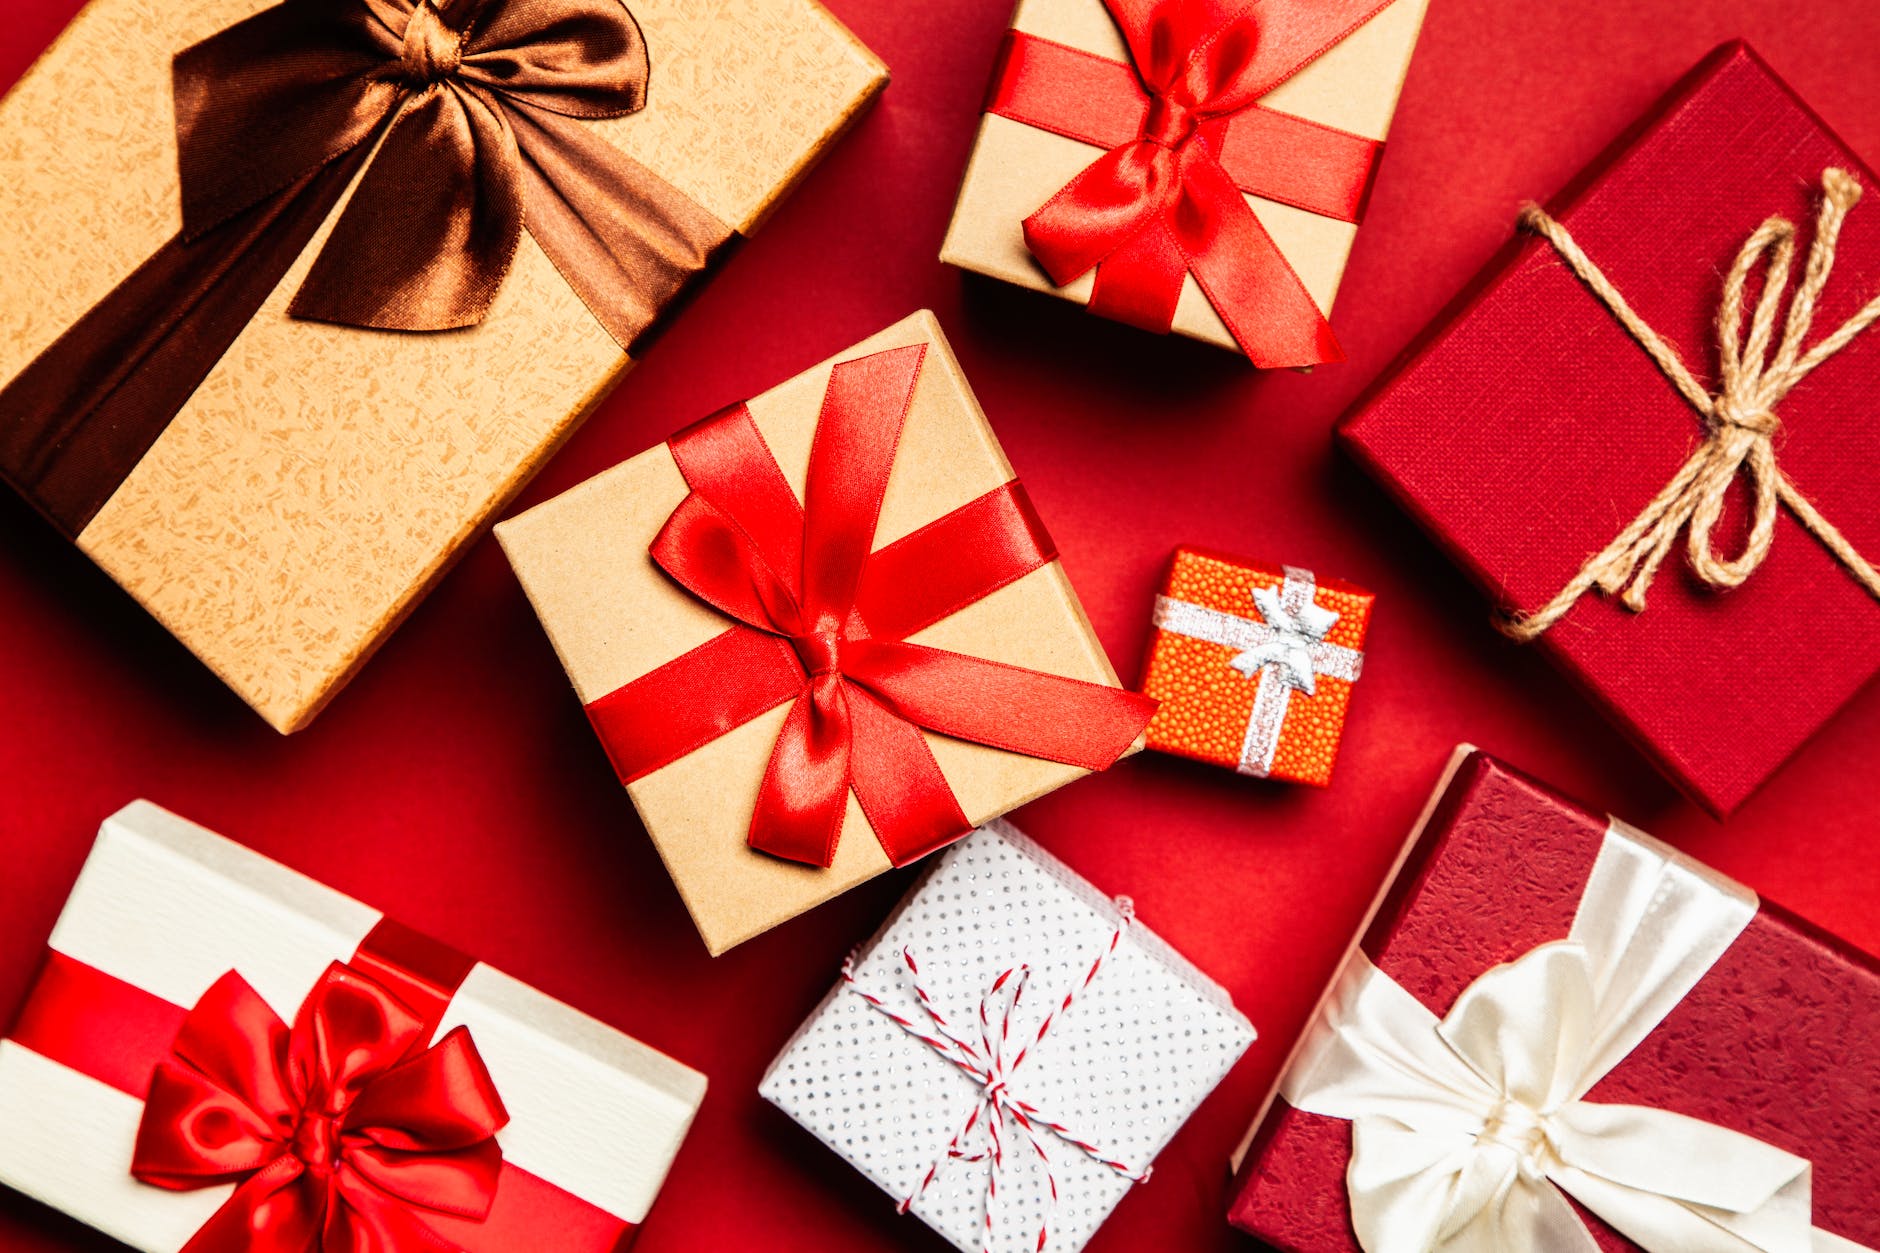 Affordable Christmas Gift Ideas for Adults - Practical and Budget-Friendly Options